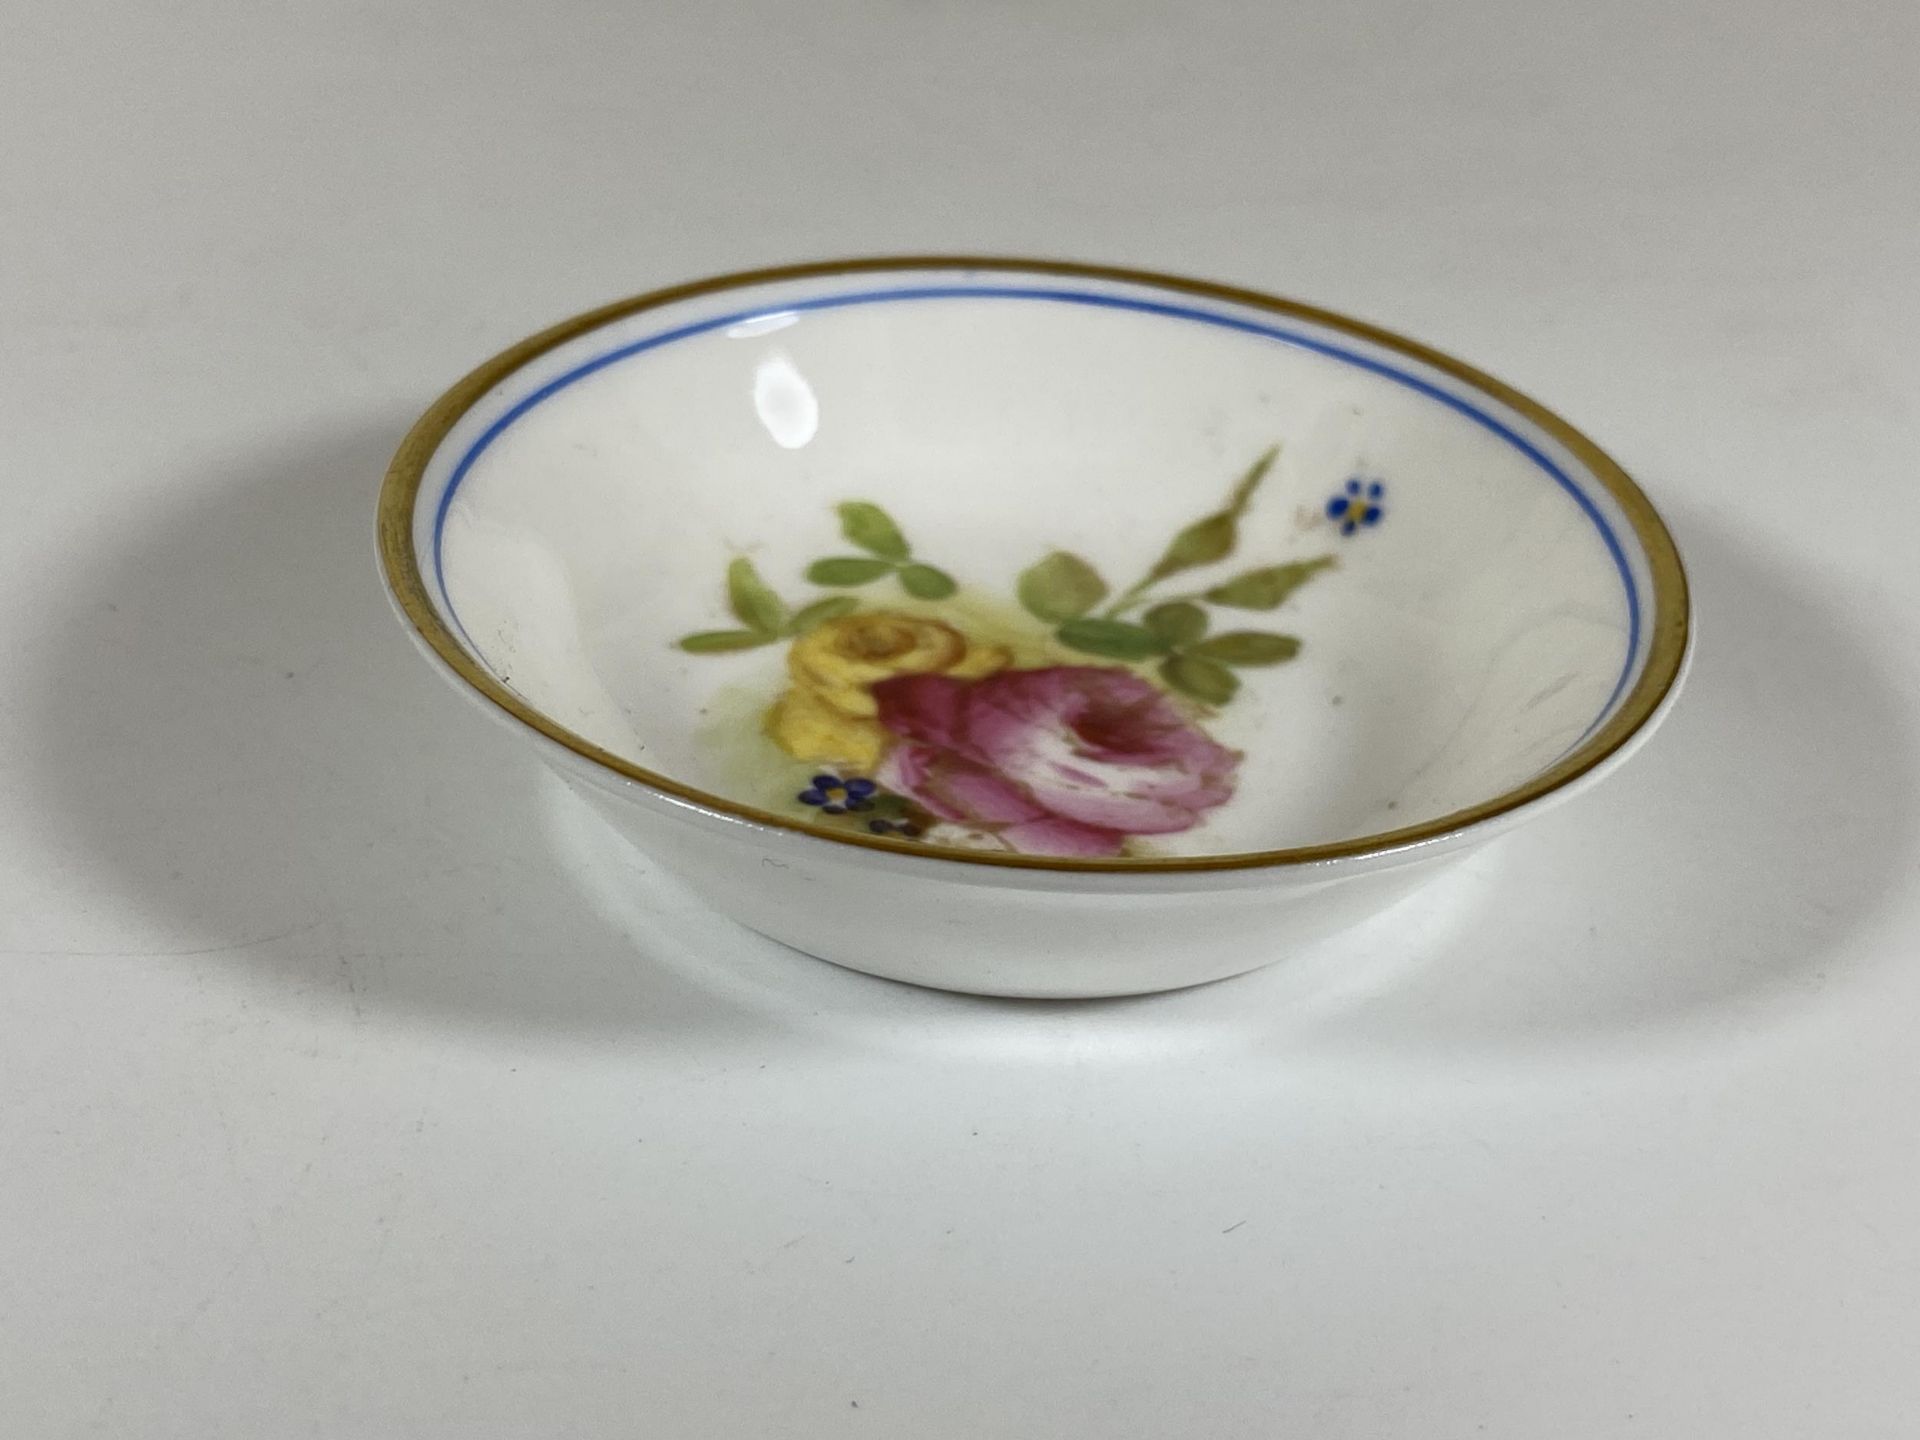 AN ANTIQUE 1921 HAND PAINTED ROYAL WORCESTER FLORAL PIN DISH, DIAMETER 7CM - Image 2 of 3